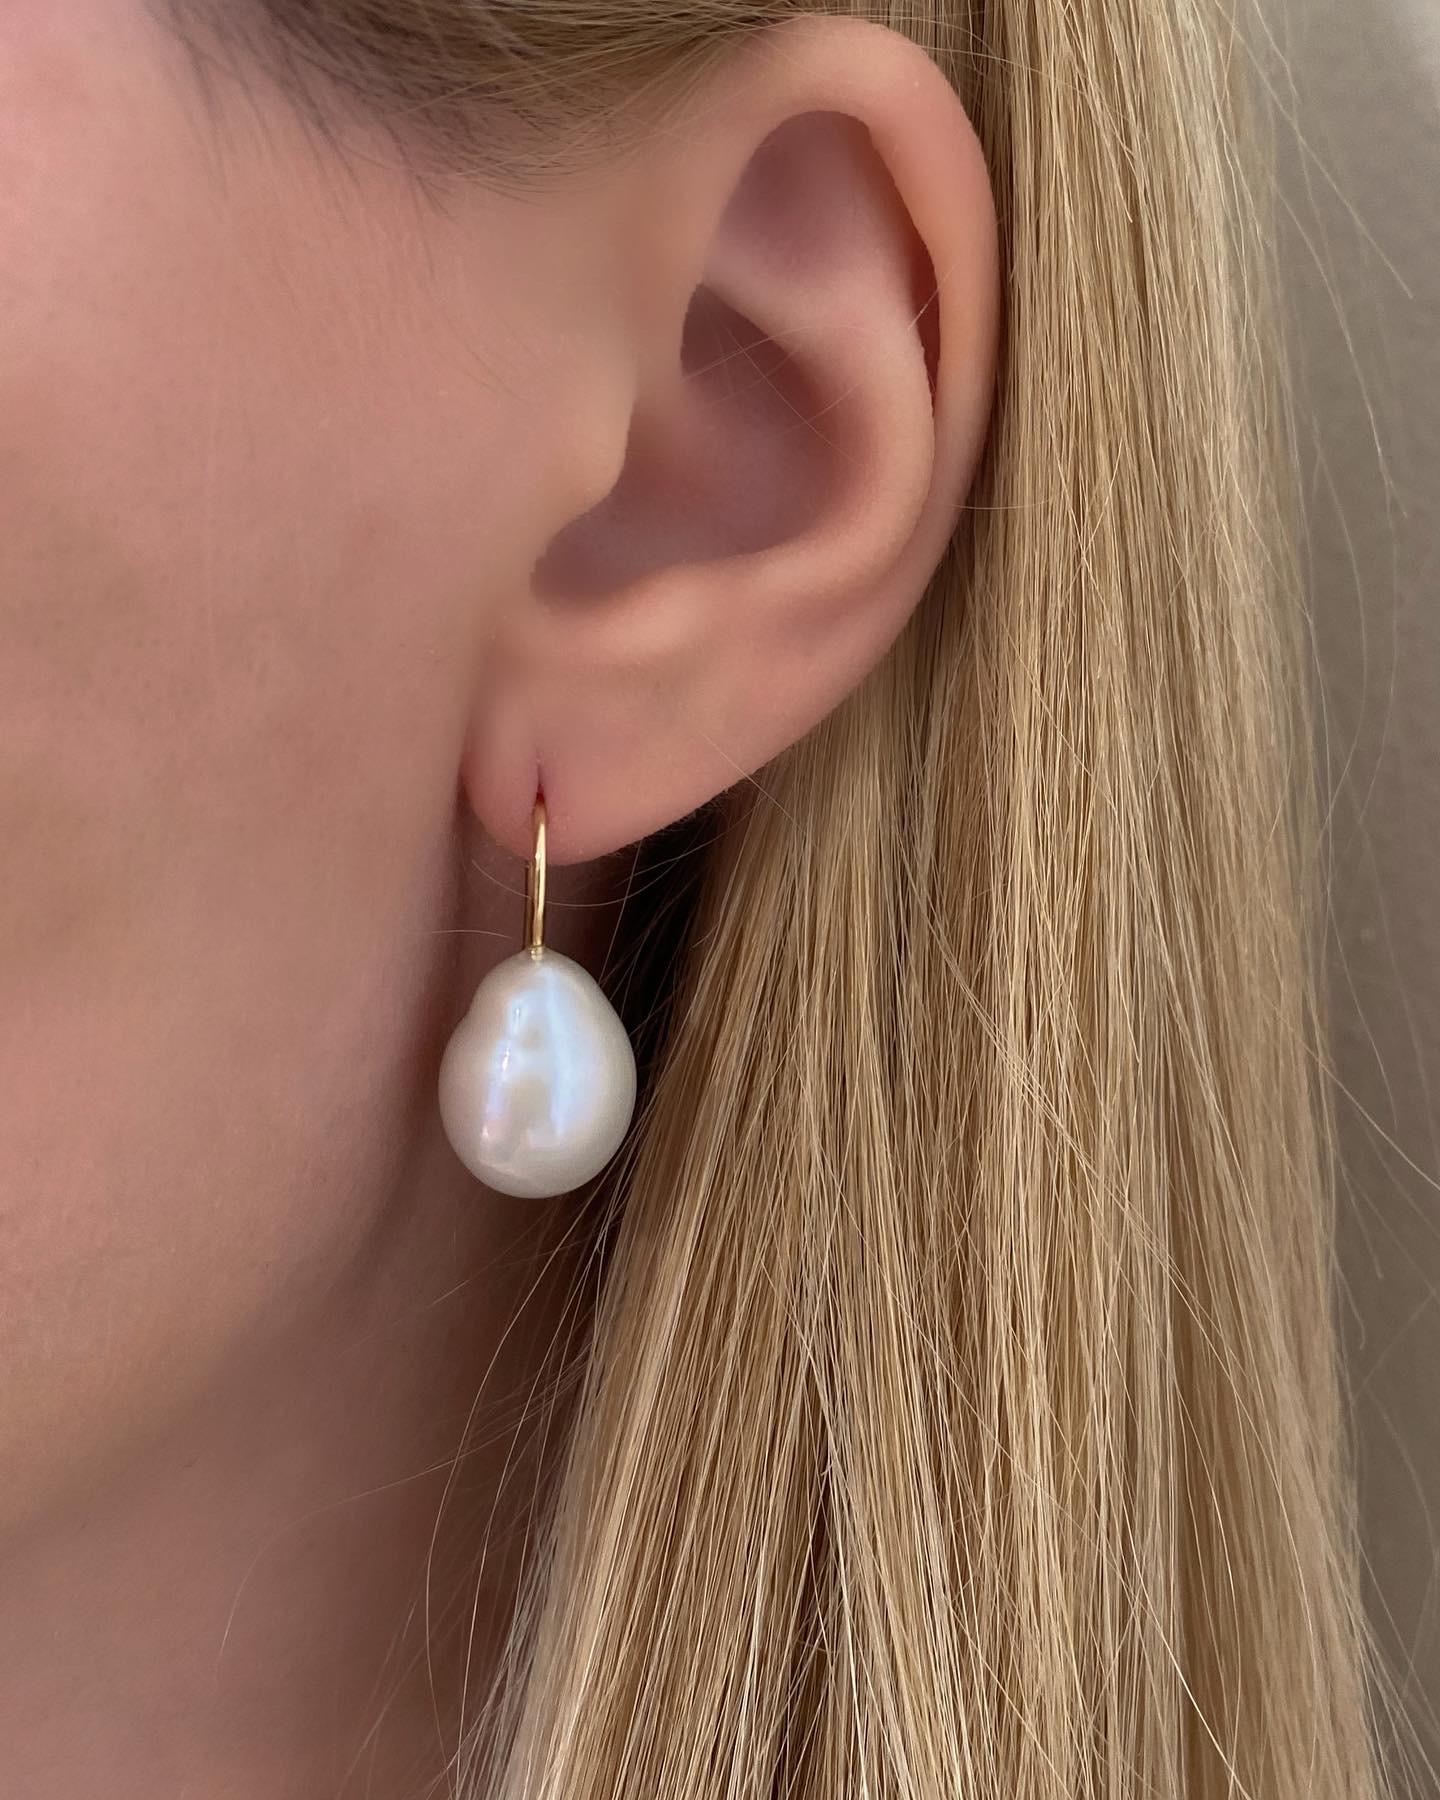 Our Baroque Drop Pearl Earrings are a best seller in our collection. This pair of earrings features baroque, drop shape pearls and a slim 18K Yellow Gold hook design that slips on to the ear. They are easy to slip on and comfortable to wear all day